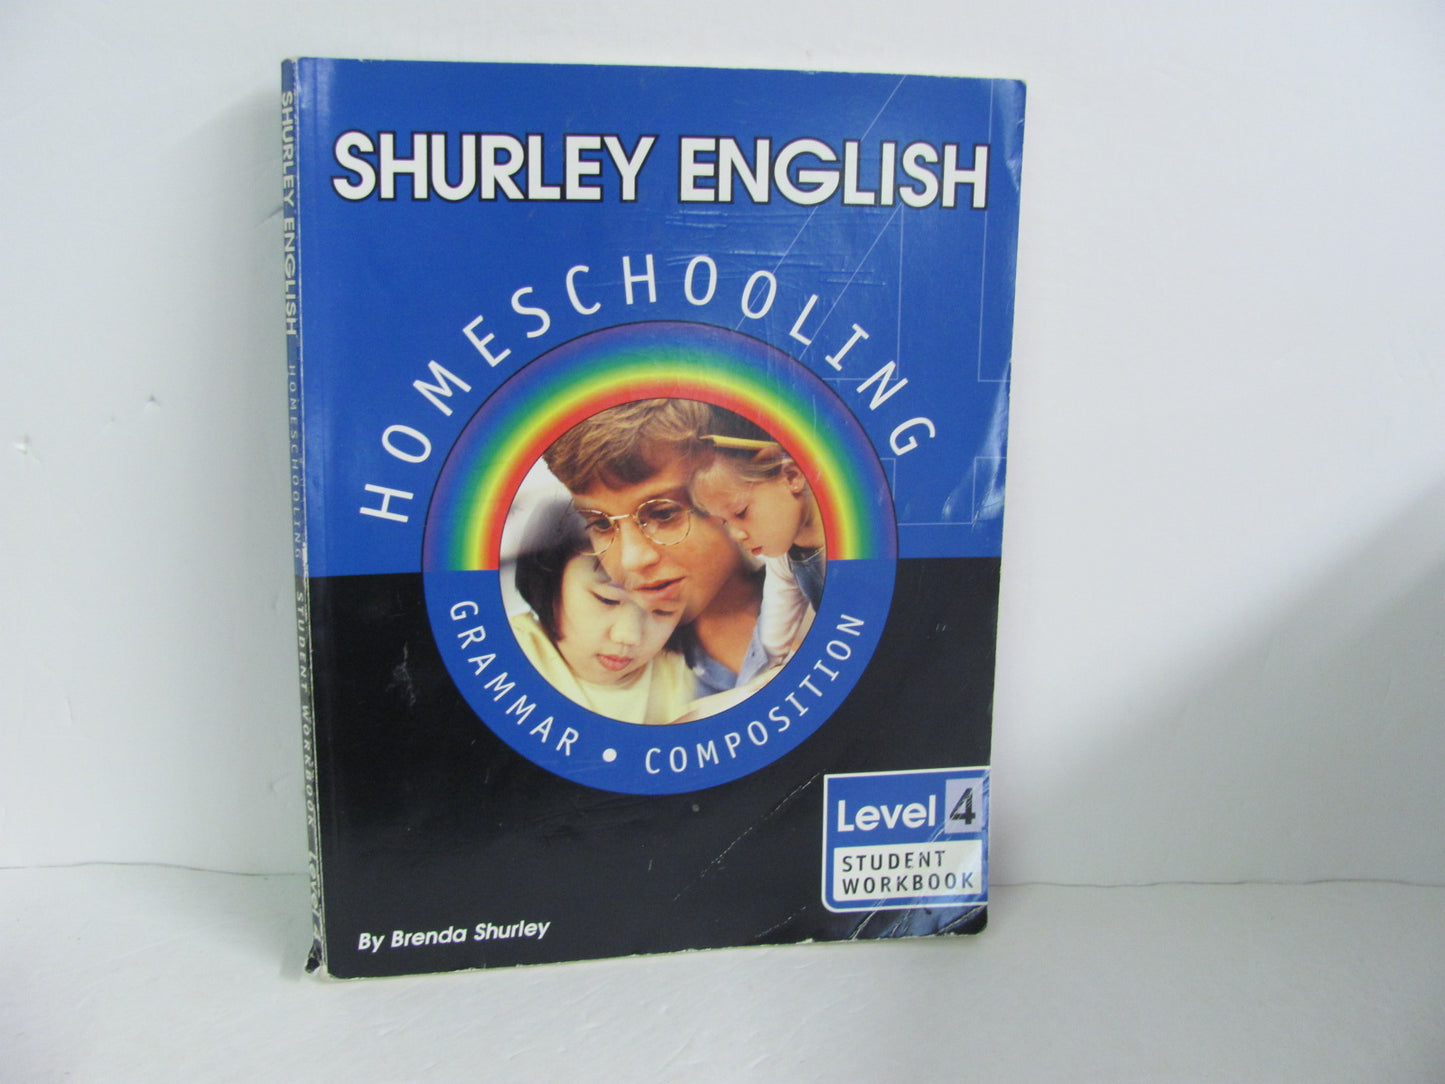 Shurley English Level 4 Shurley Student Workbook Pre-Owned Language Textbooks